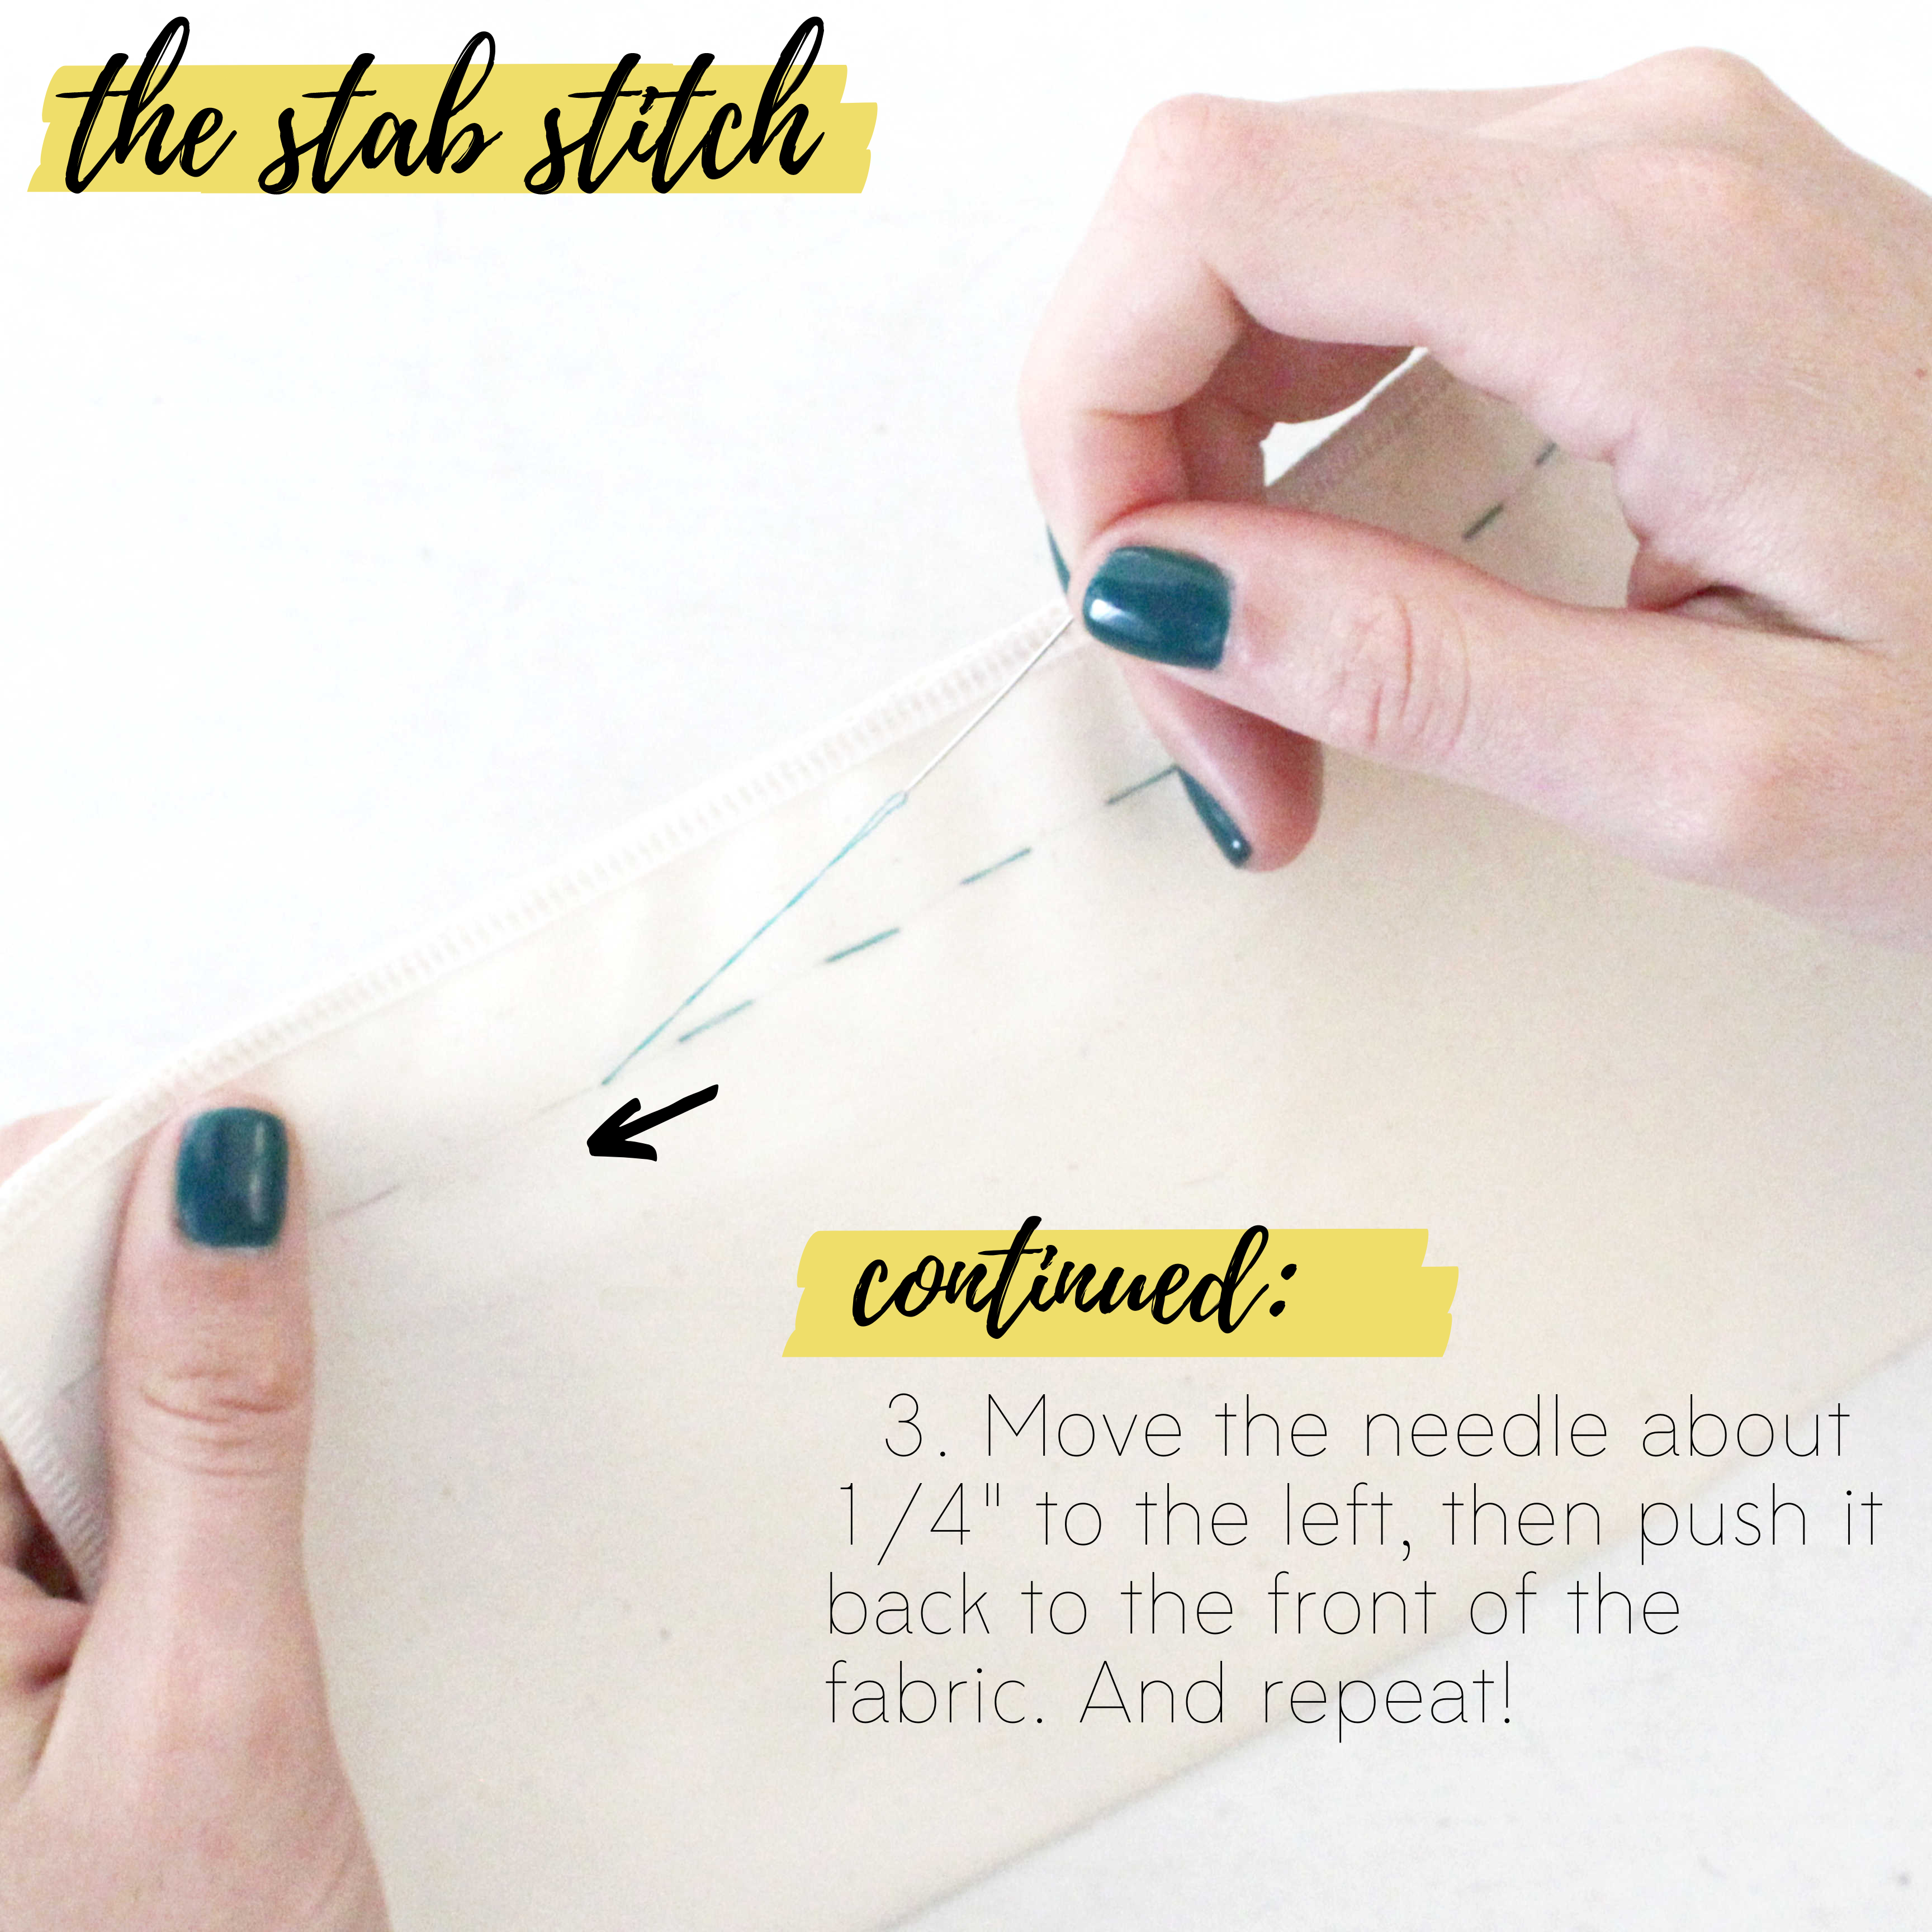 How To Sew Different Types Of Hand Stitches: The Stab Stitch